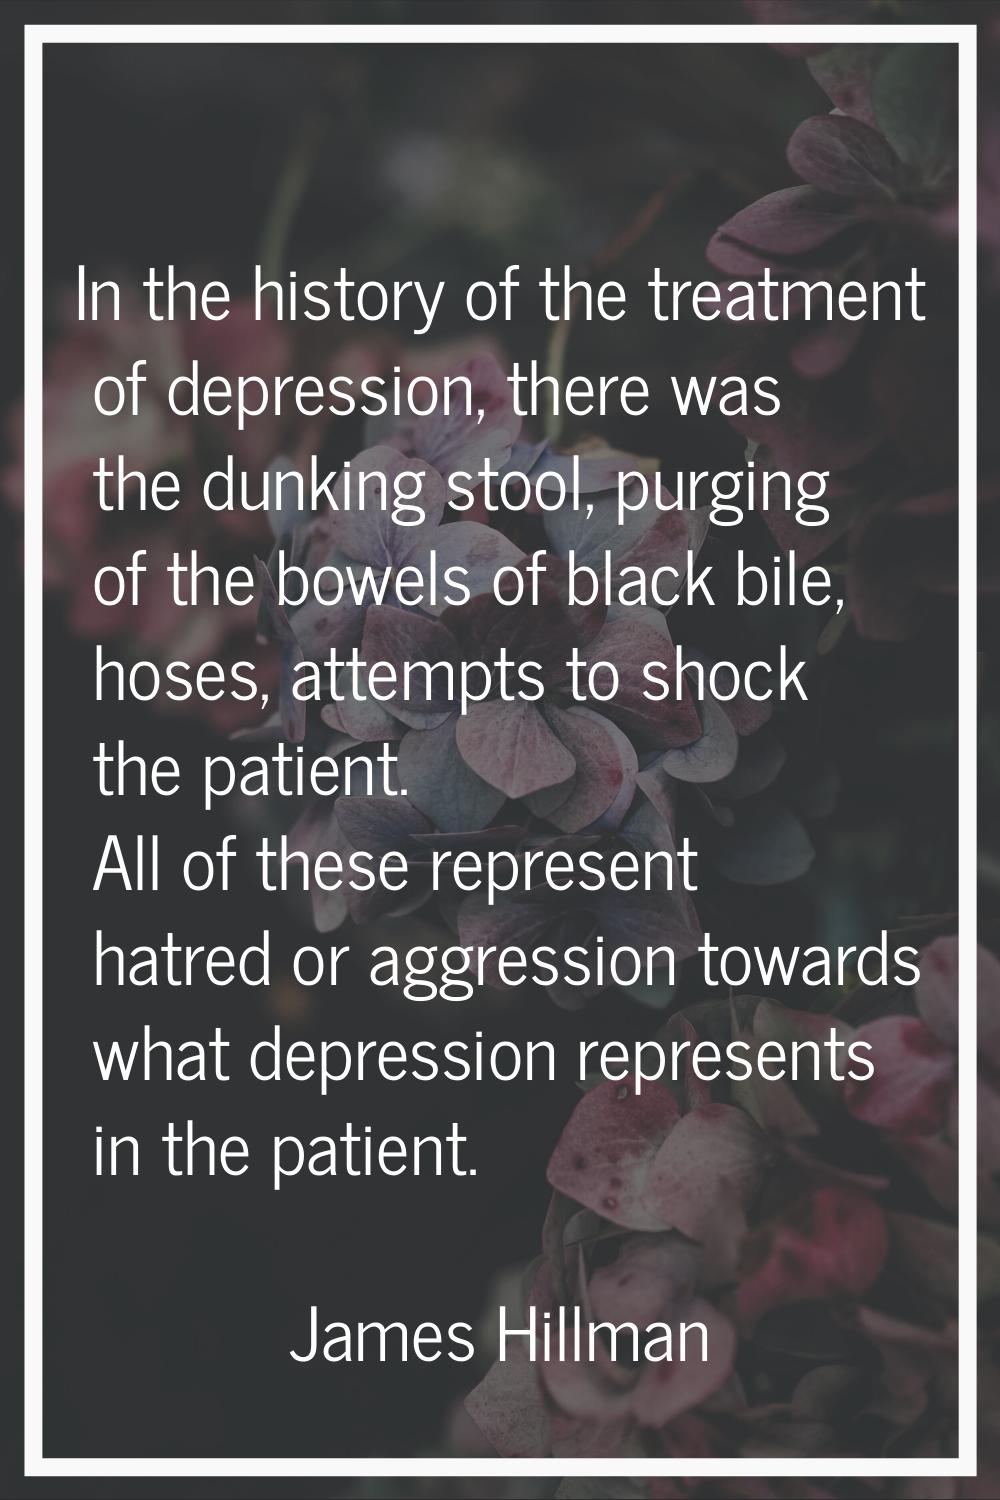 In the history of the treatment of depression, there was the dunking stool, purging of the bowels o